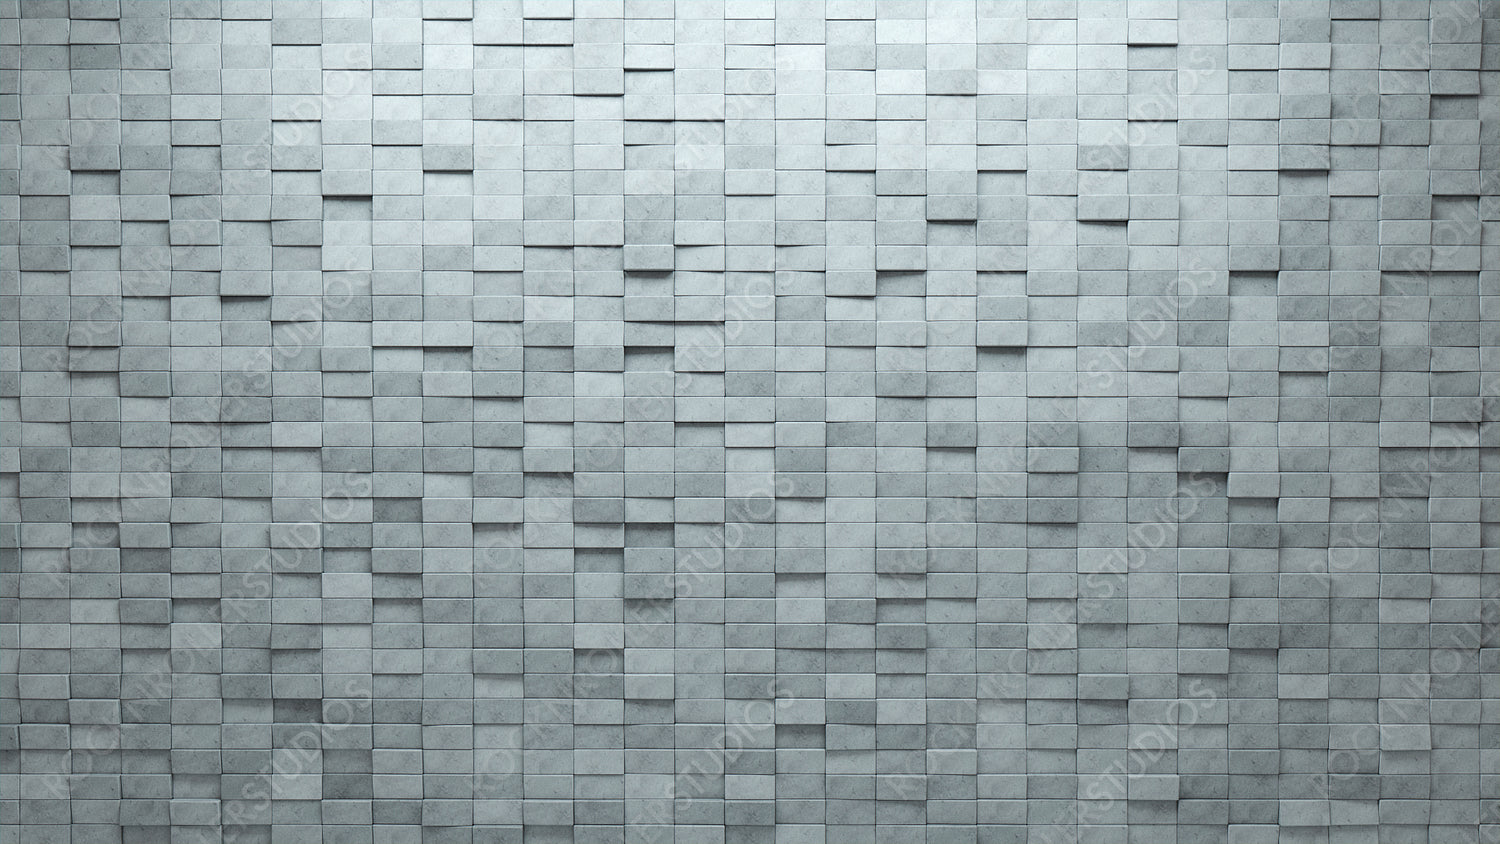 3D, Rectangular Wall background with tiles. Concrete, tile Wallpaper with Futuristic, Polished blocks. 3D Render